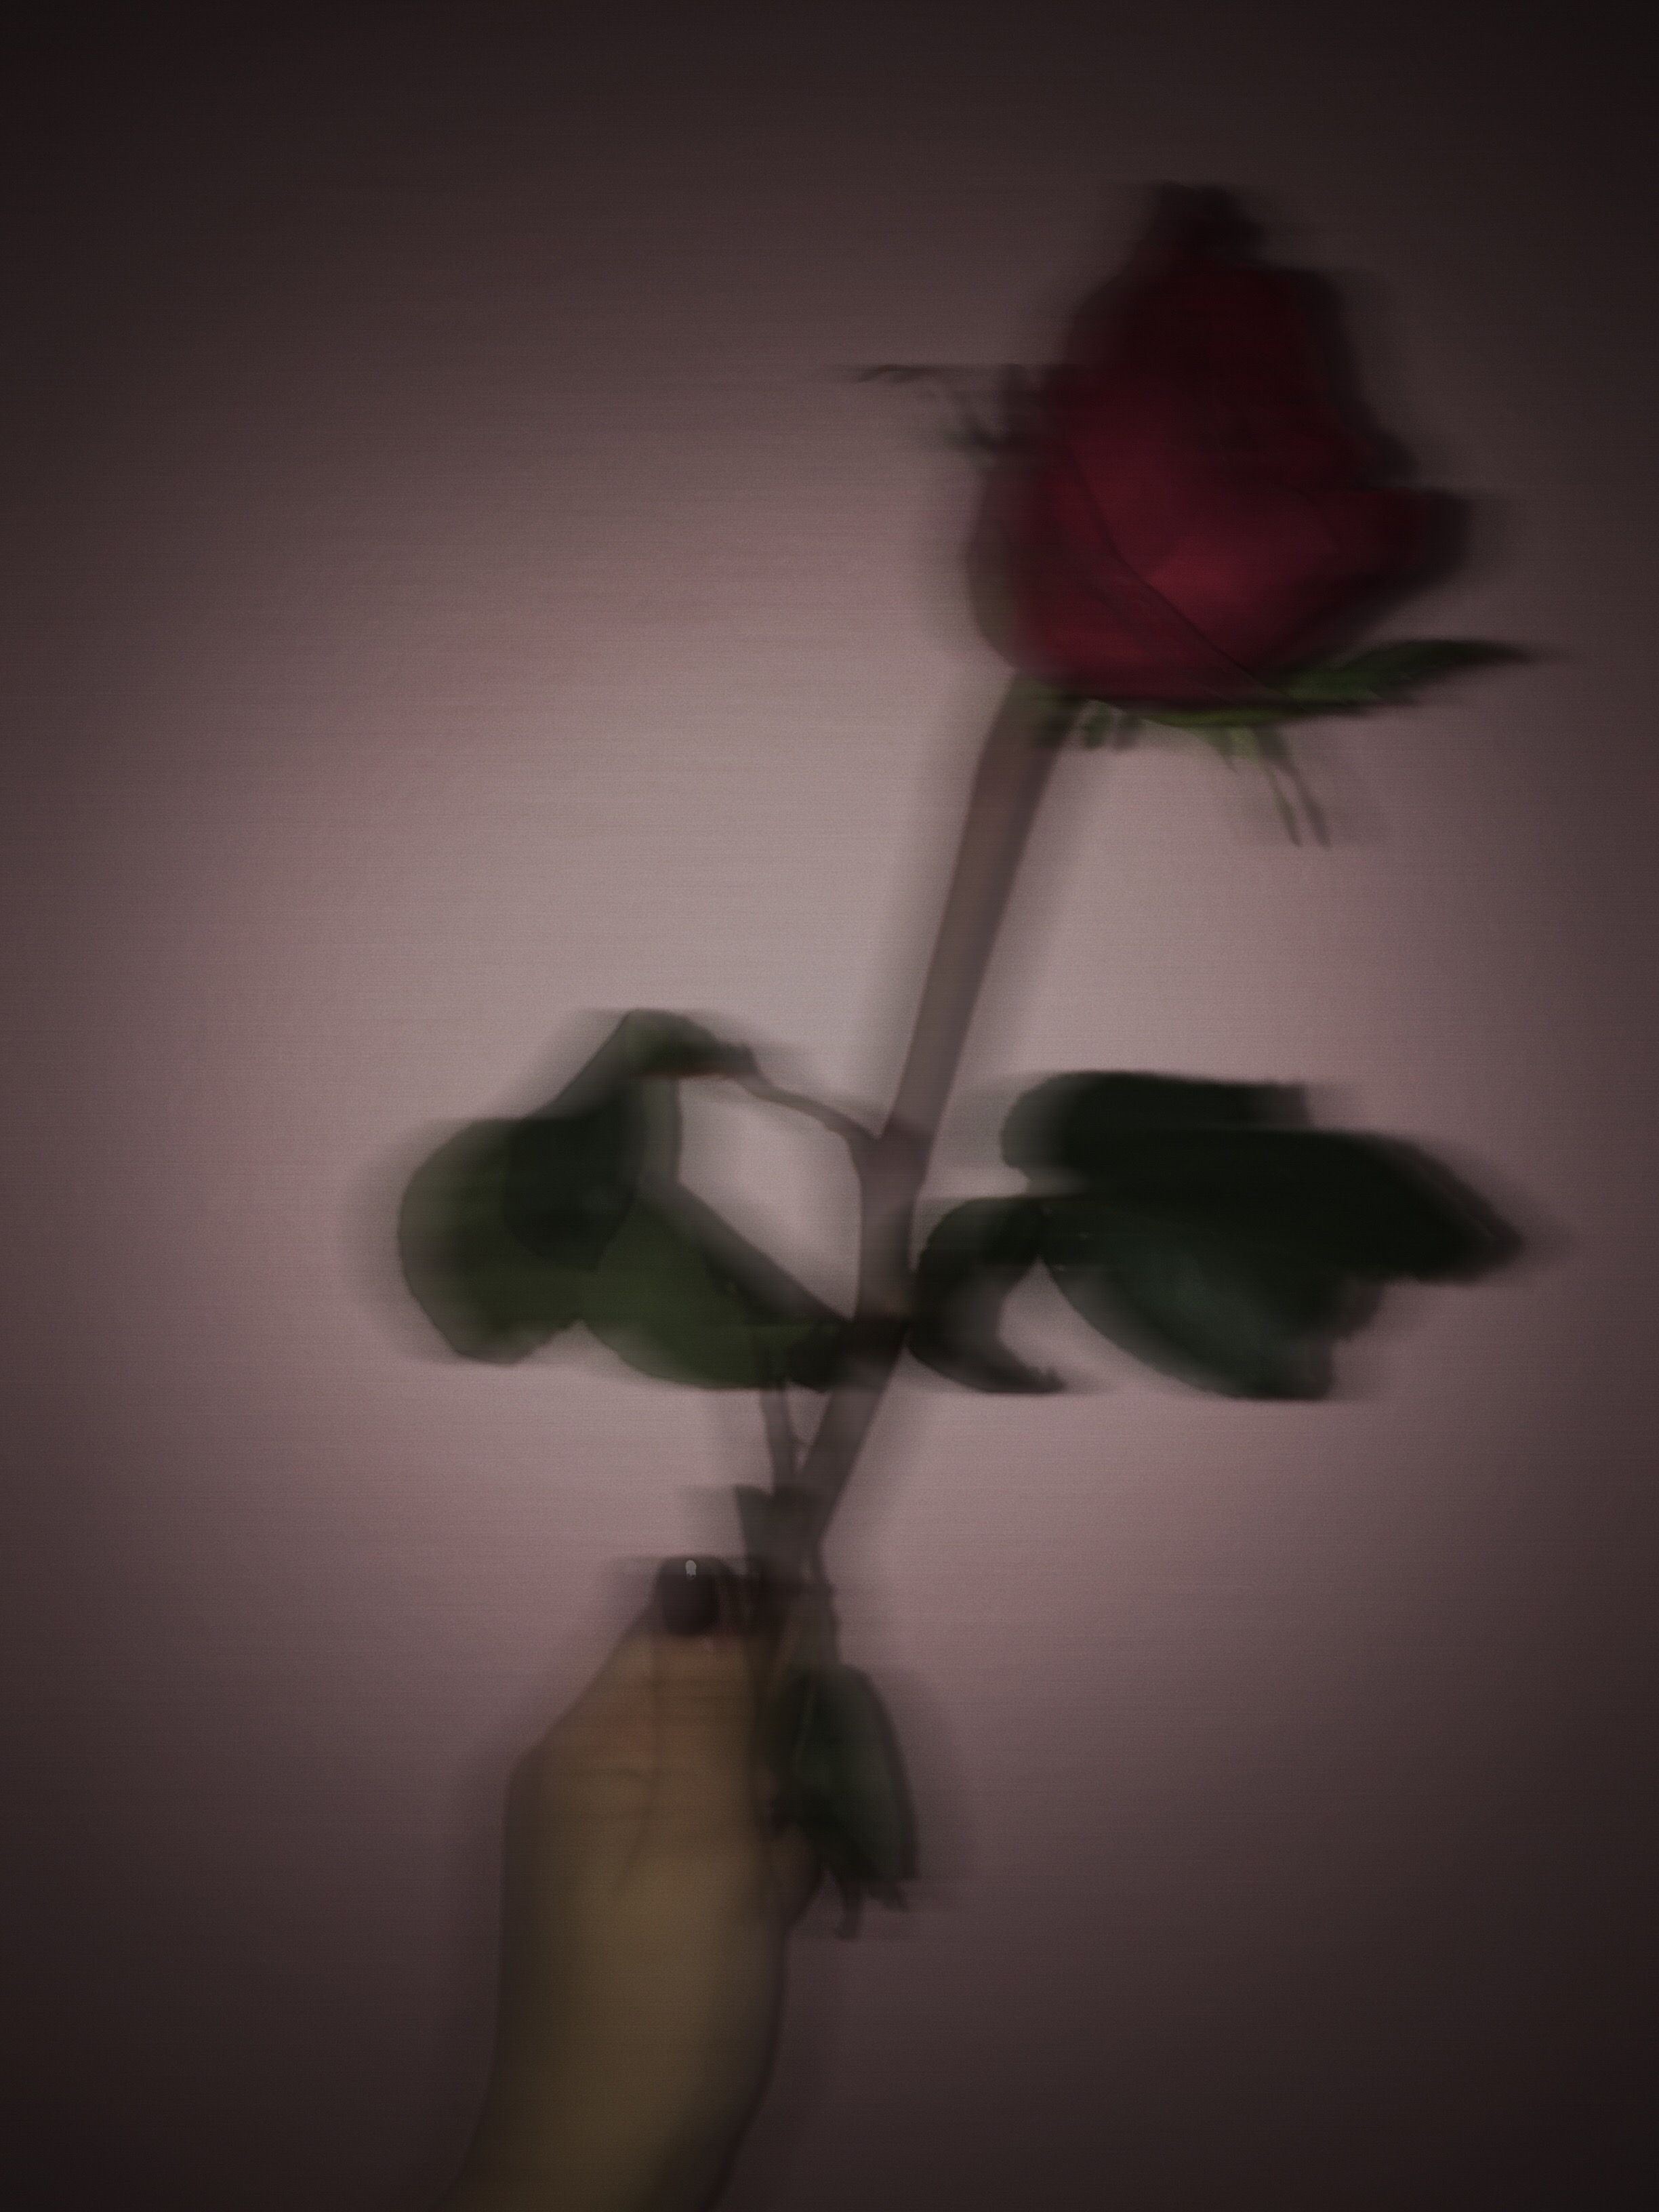 Best aesthetic roses image. Aesthetic roses, Red aesthetic